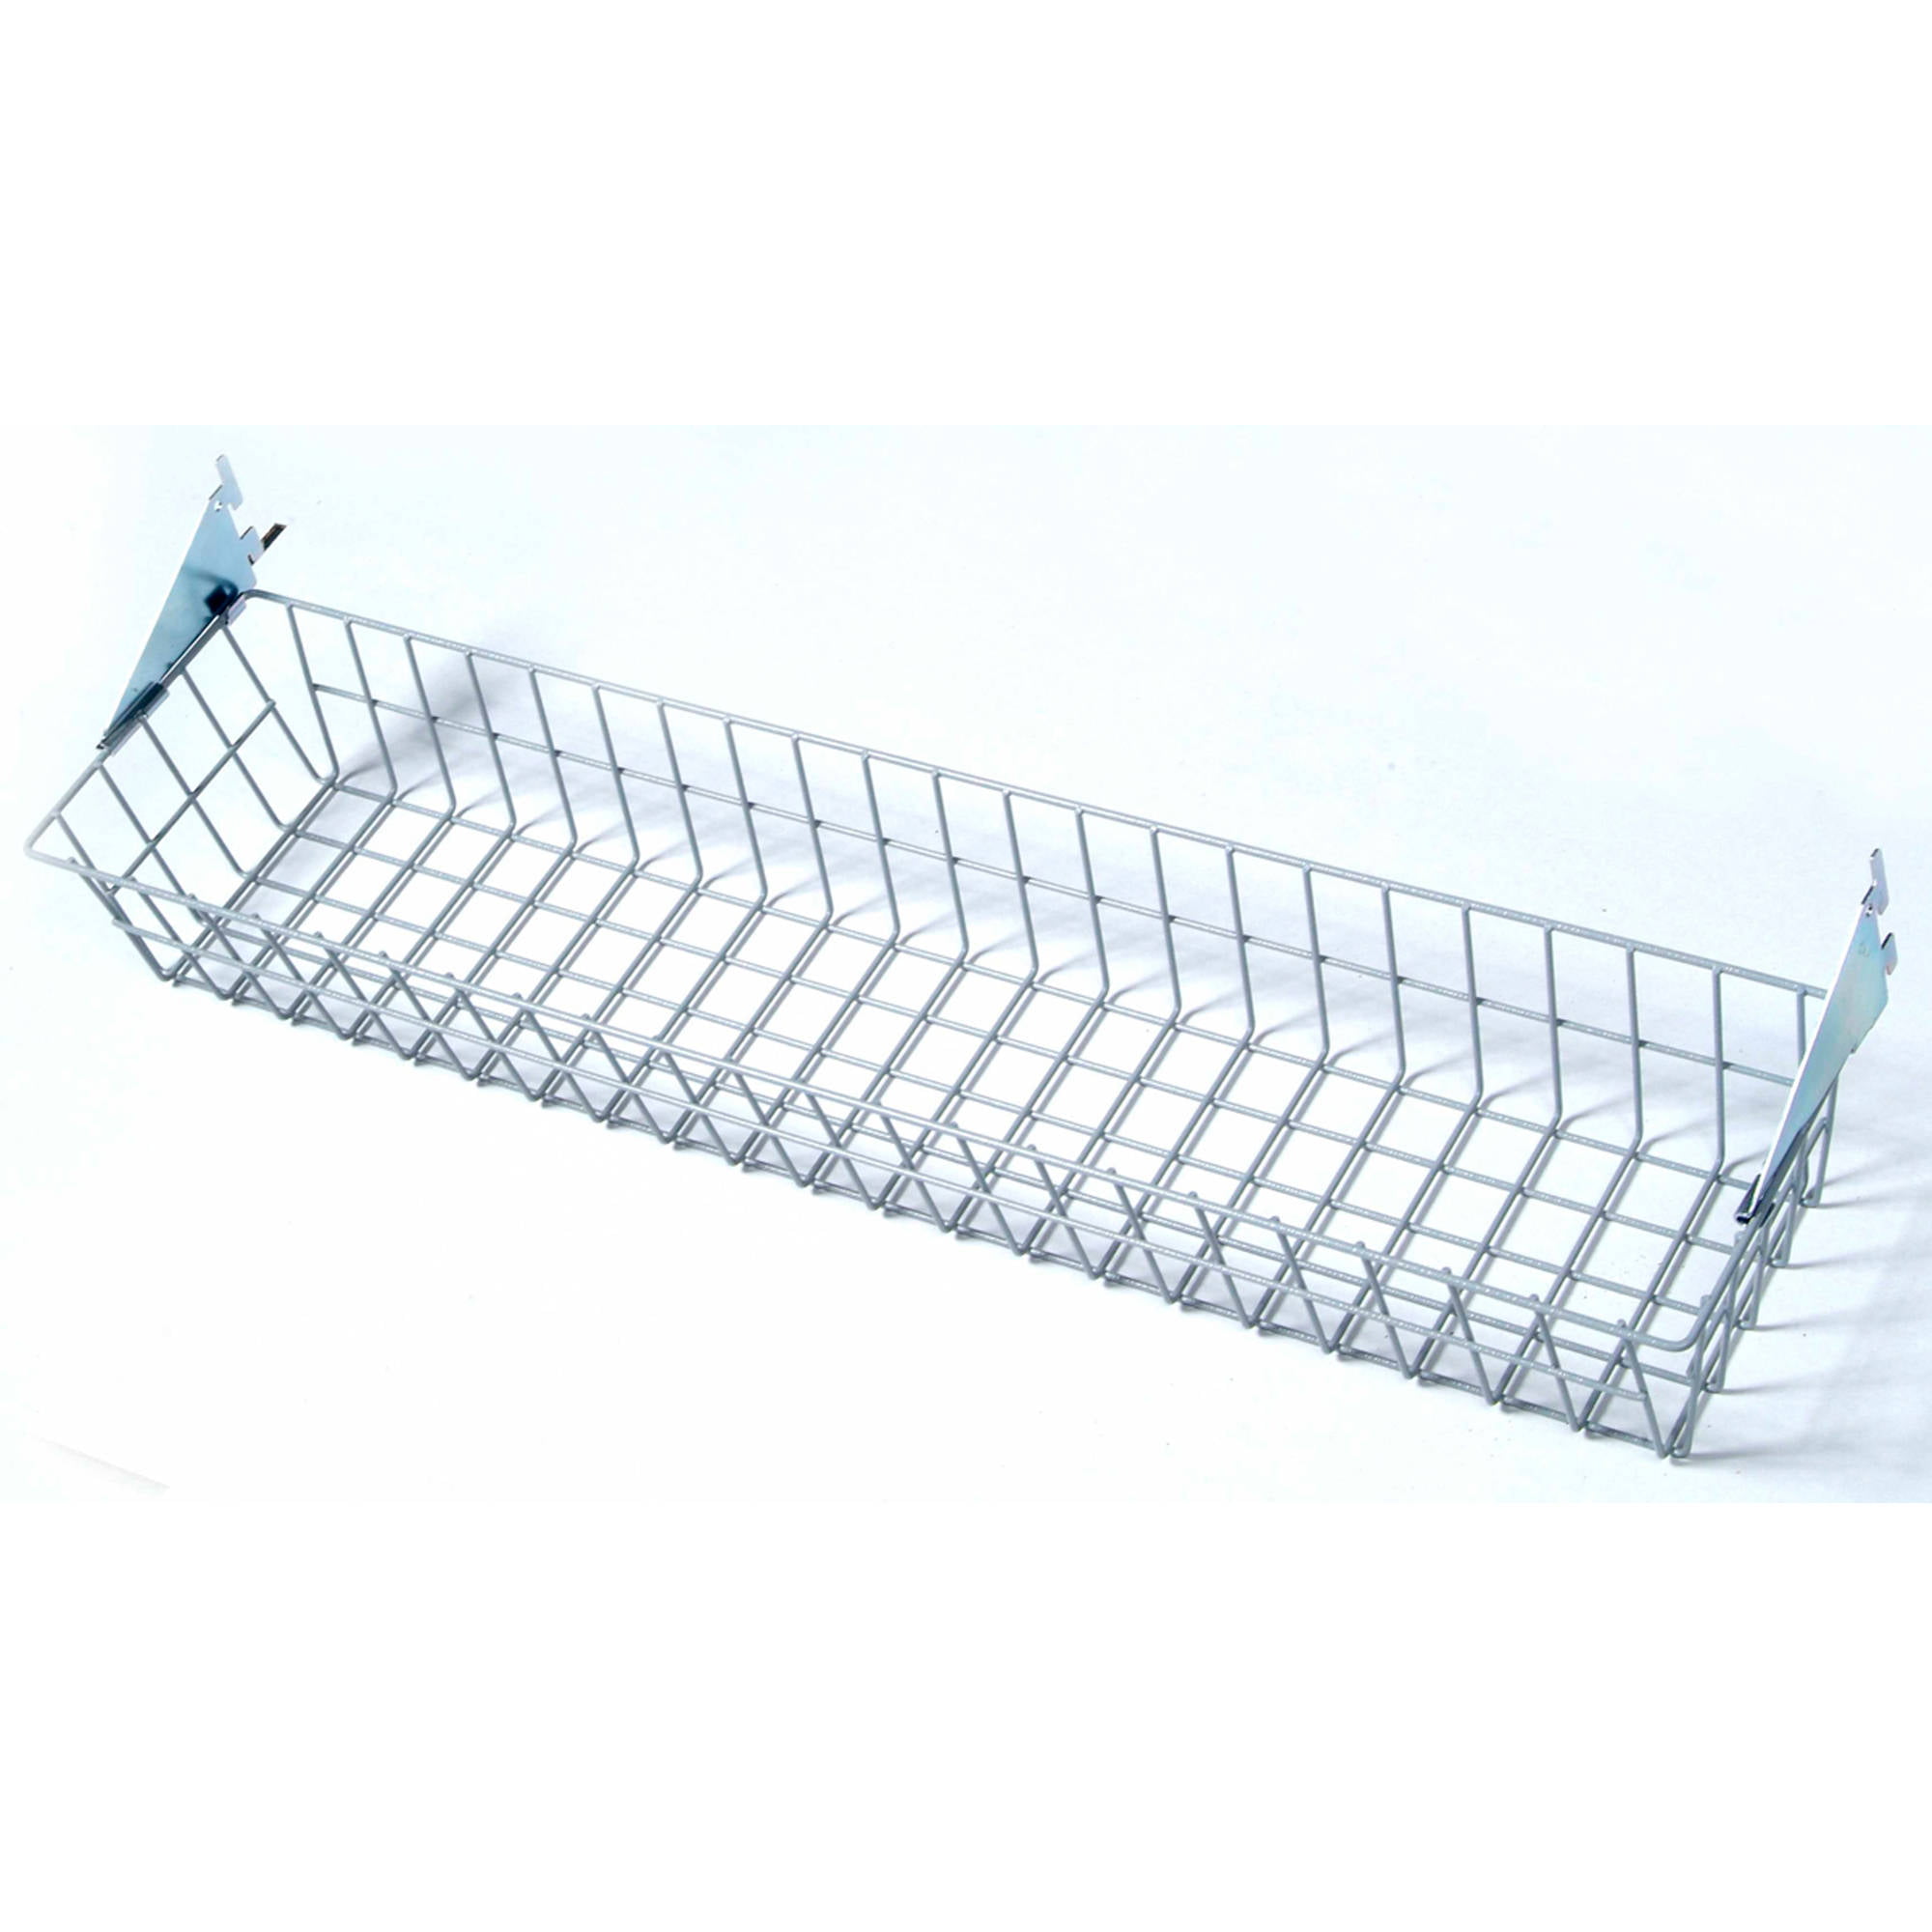 Triton Products 1775 Storability Wire Basket 15-Inch W by 4-Inch H by 6-1//2-Inch D Gray Epoxy Coated Steel with Lock-On Hanging Brackets